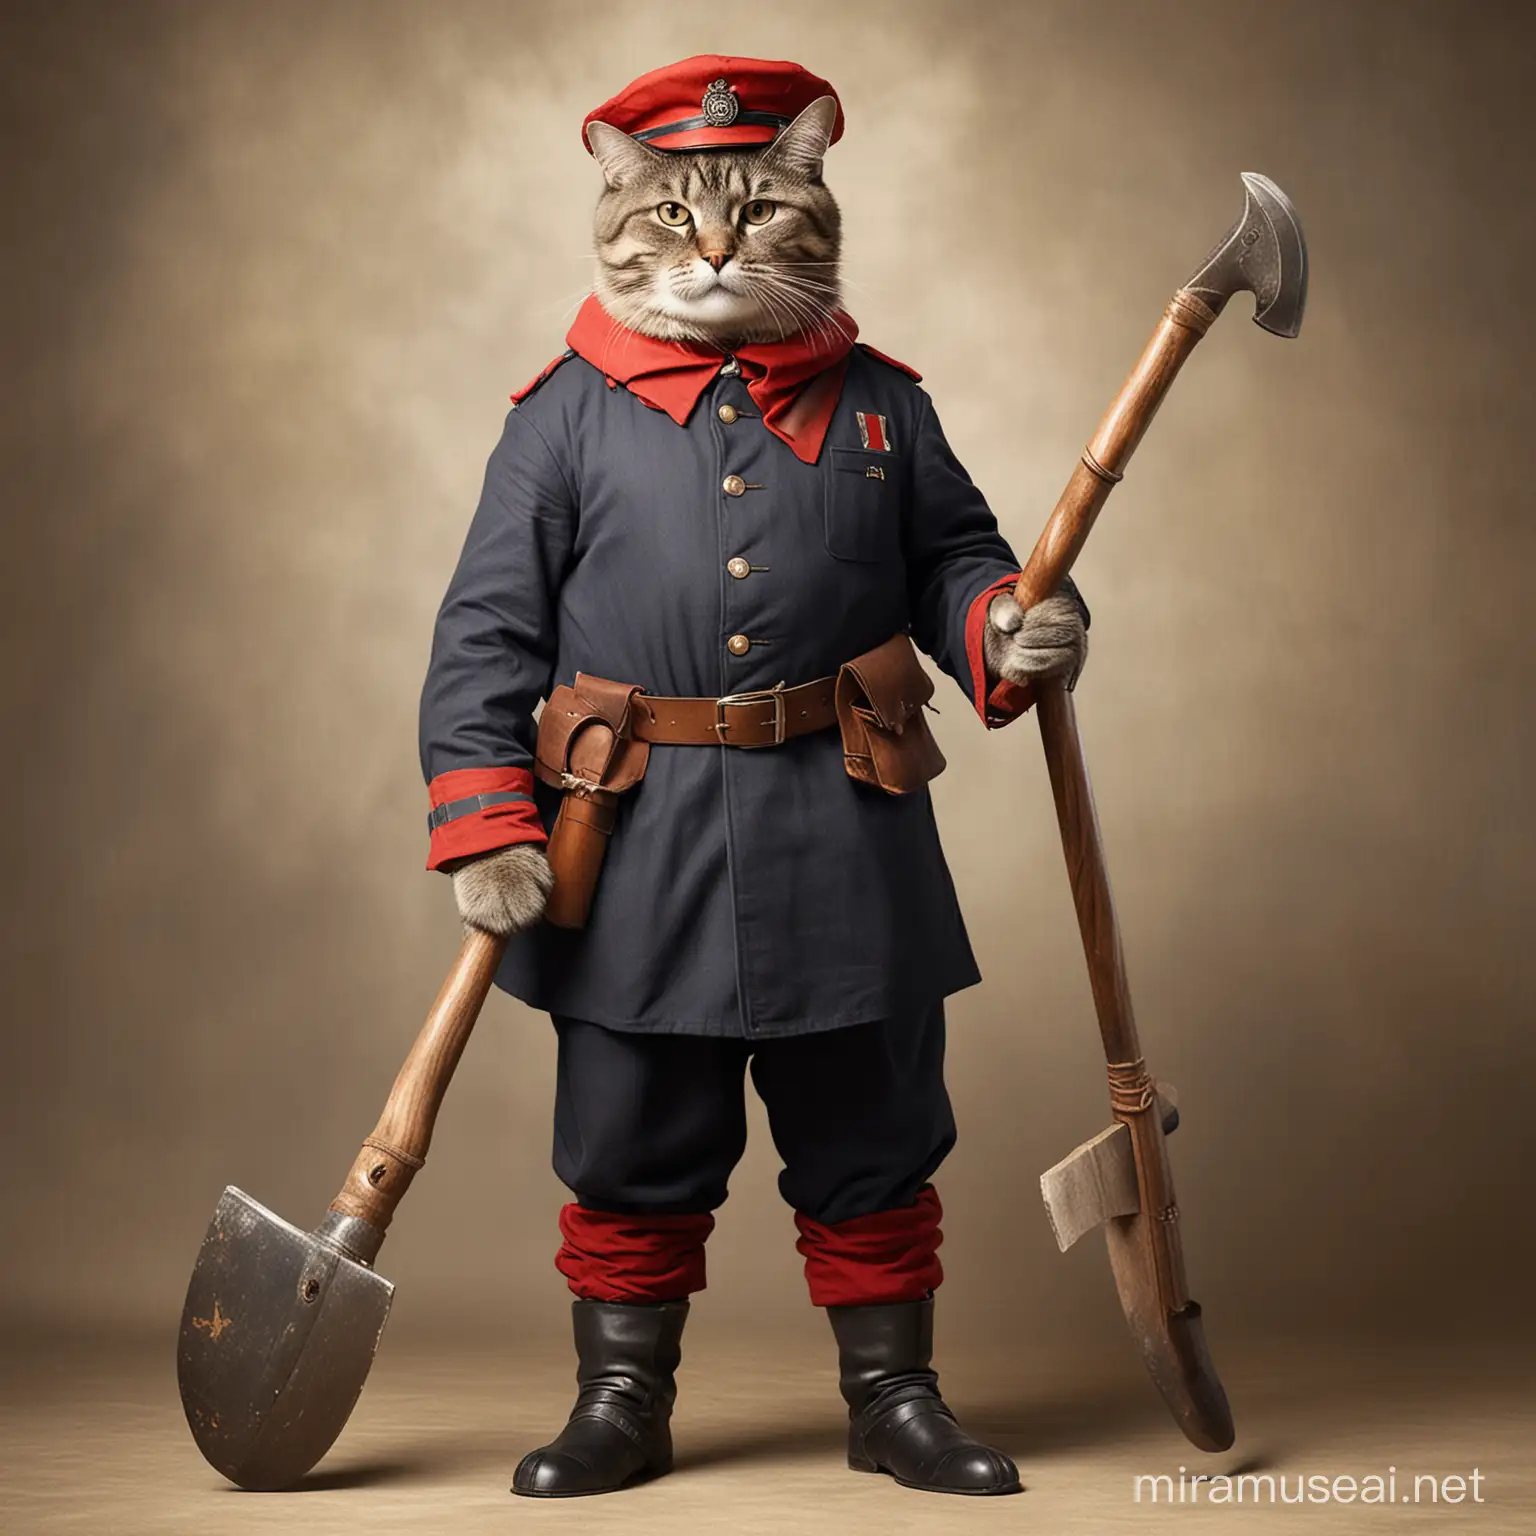 a very big anthropomorphic cat in 1920s, dressed as a fireman, brandishing an axe